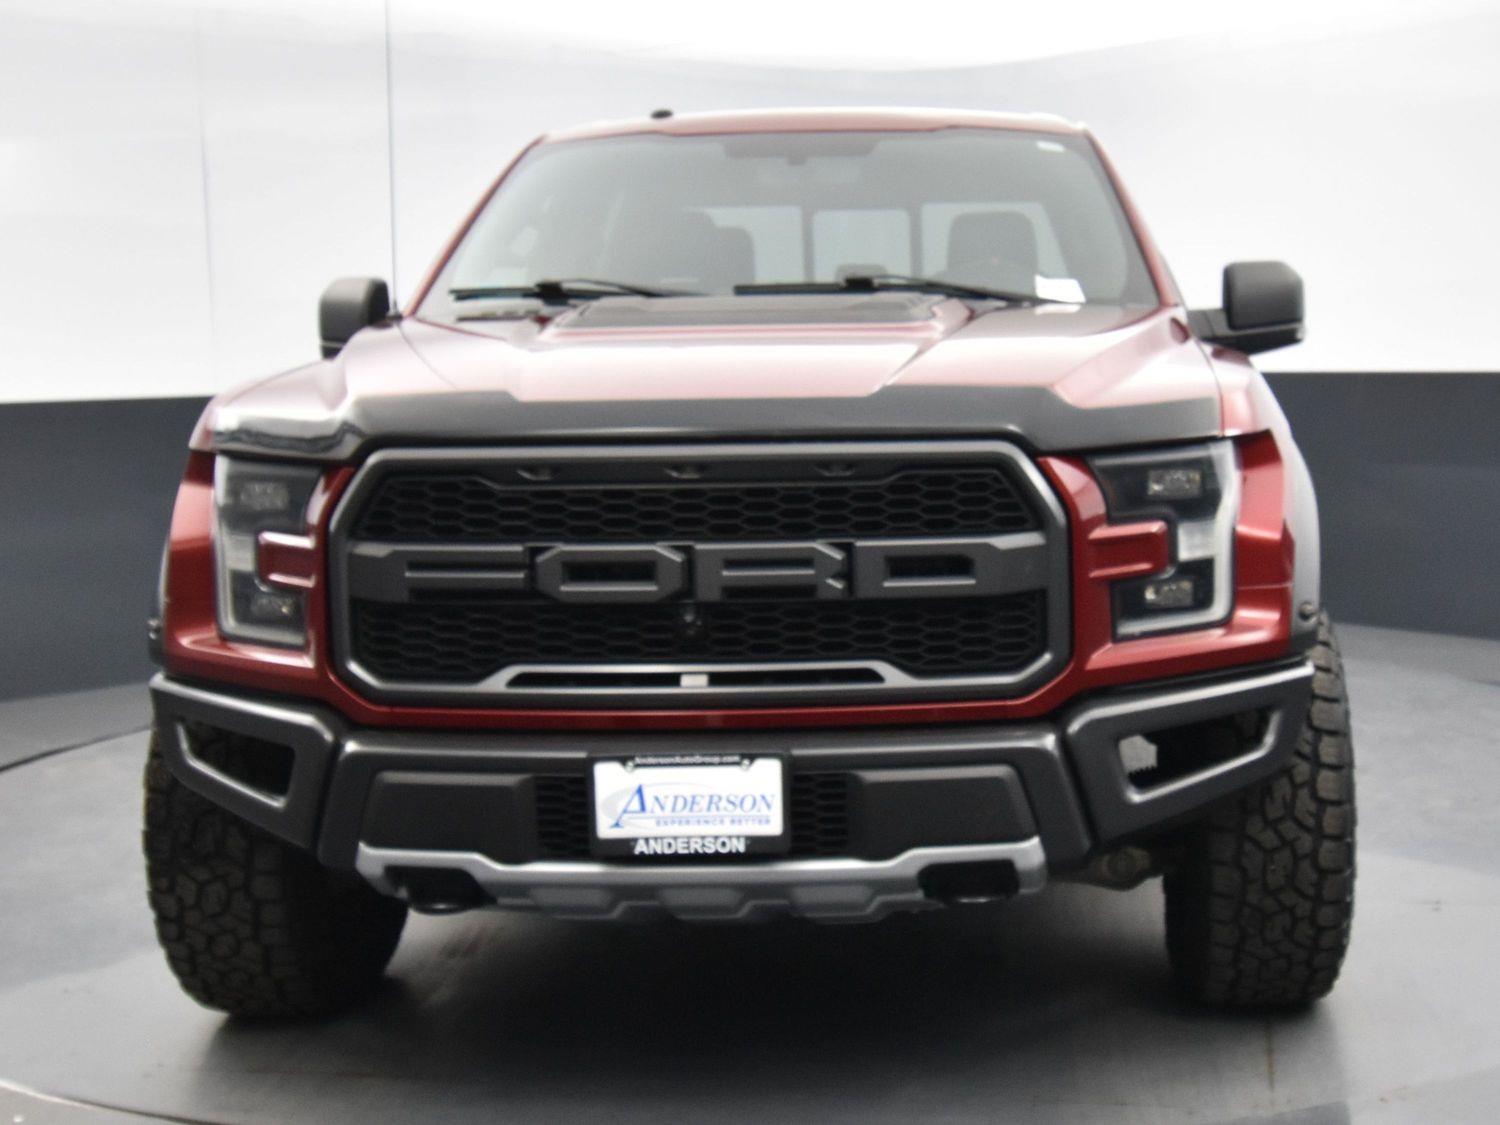 Used 2017 Ford F-150 Raptor Crew Cab Truck for sale in Grand Island NE